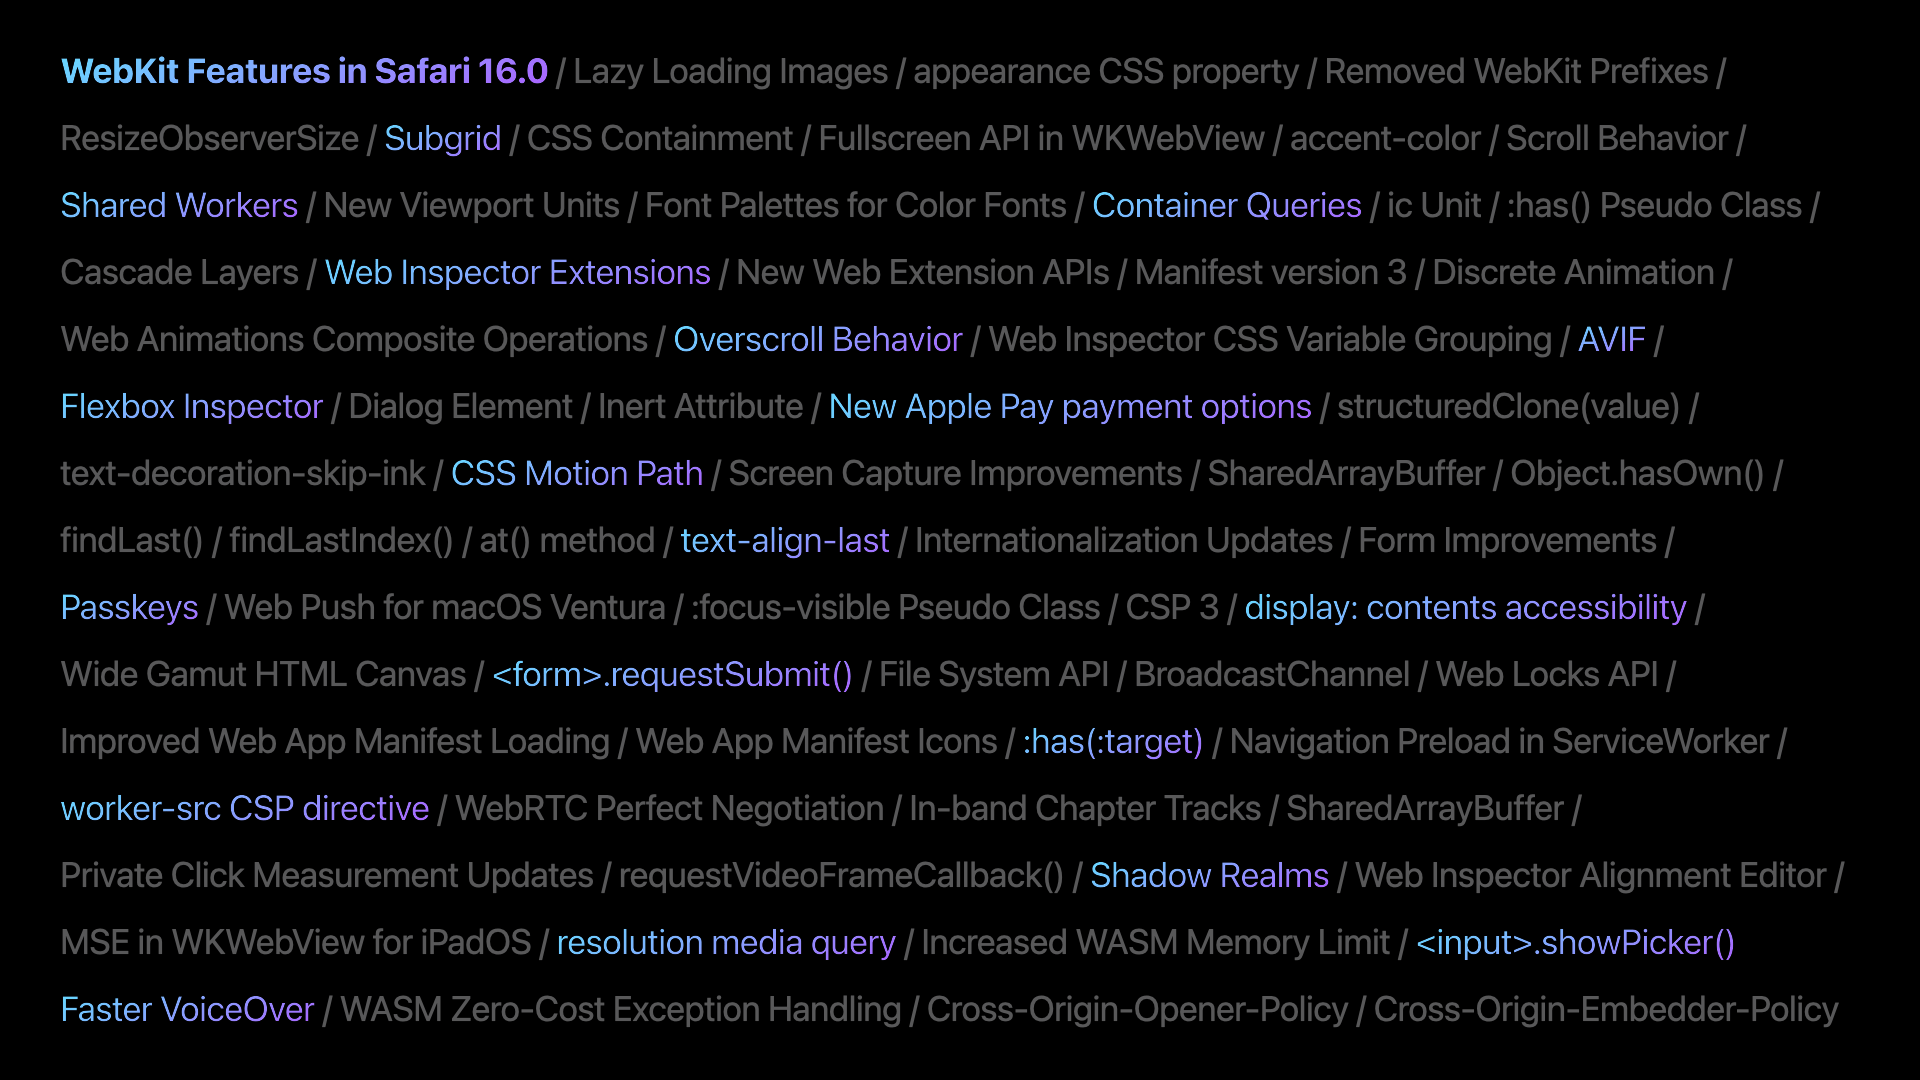 A list of new WebKit features.